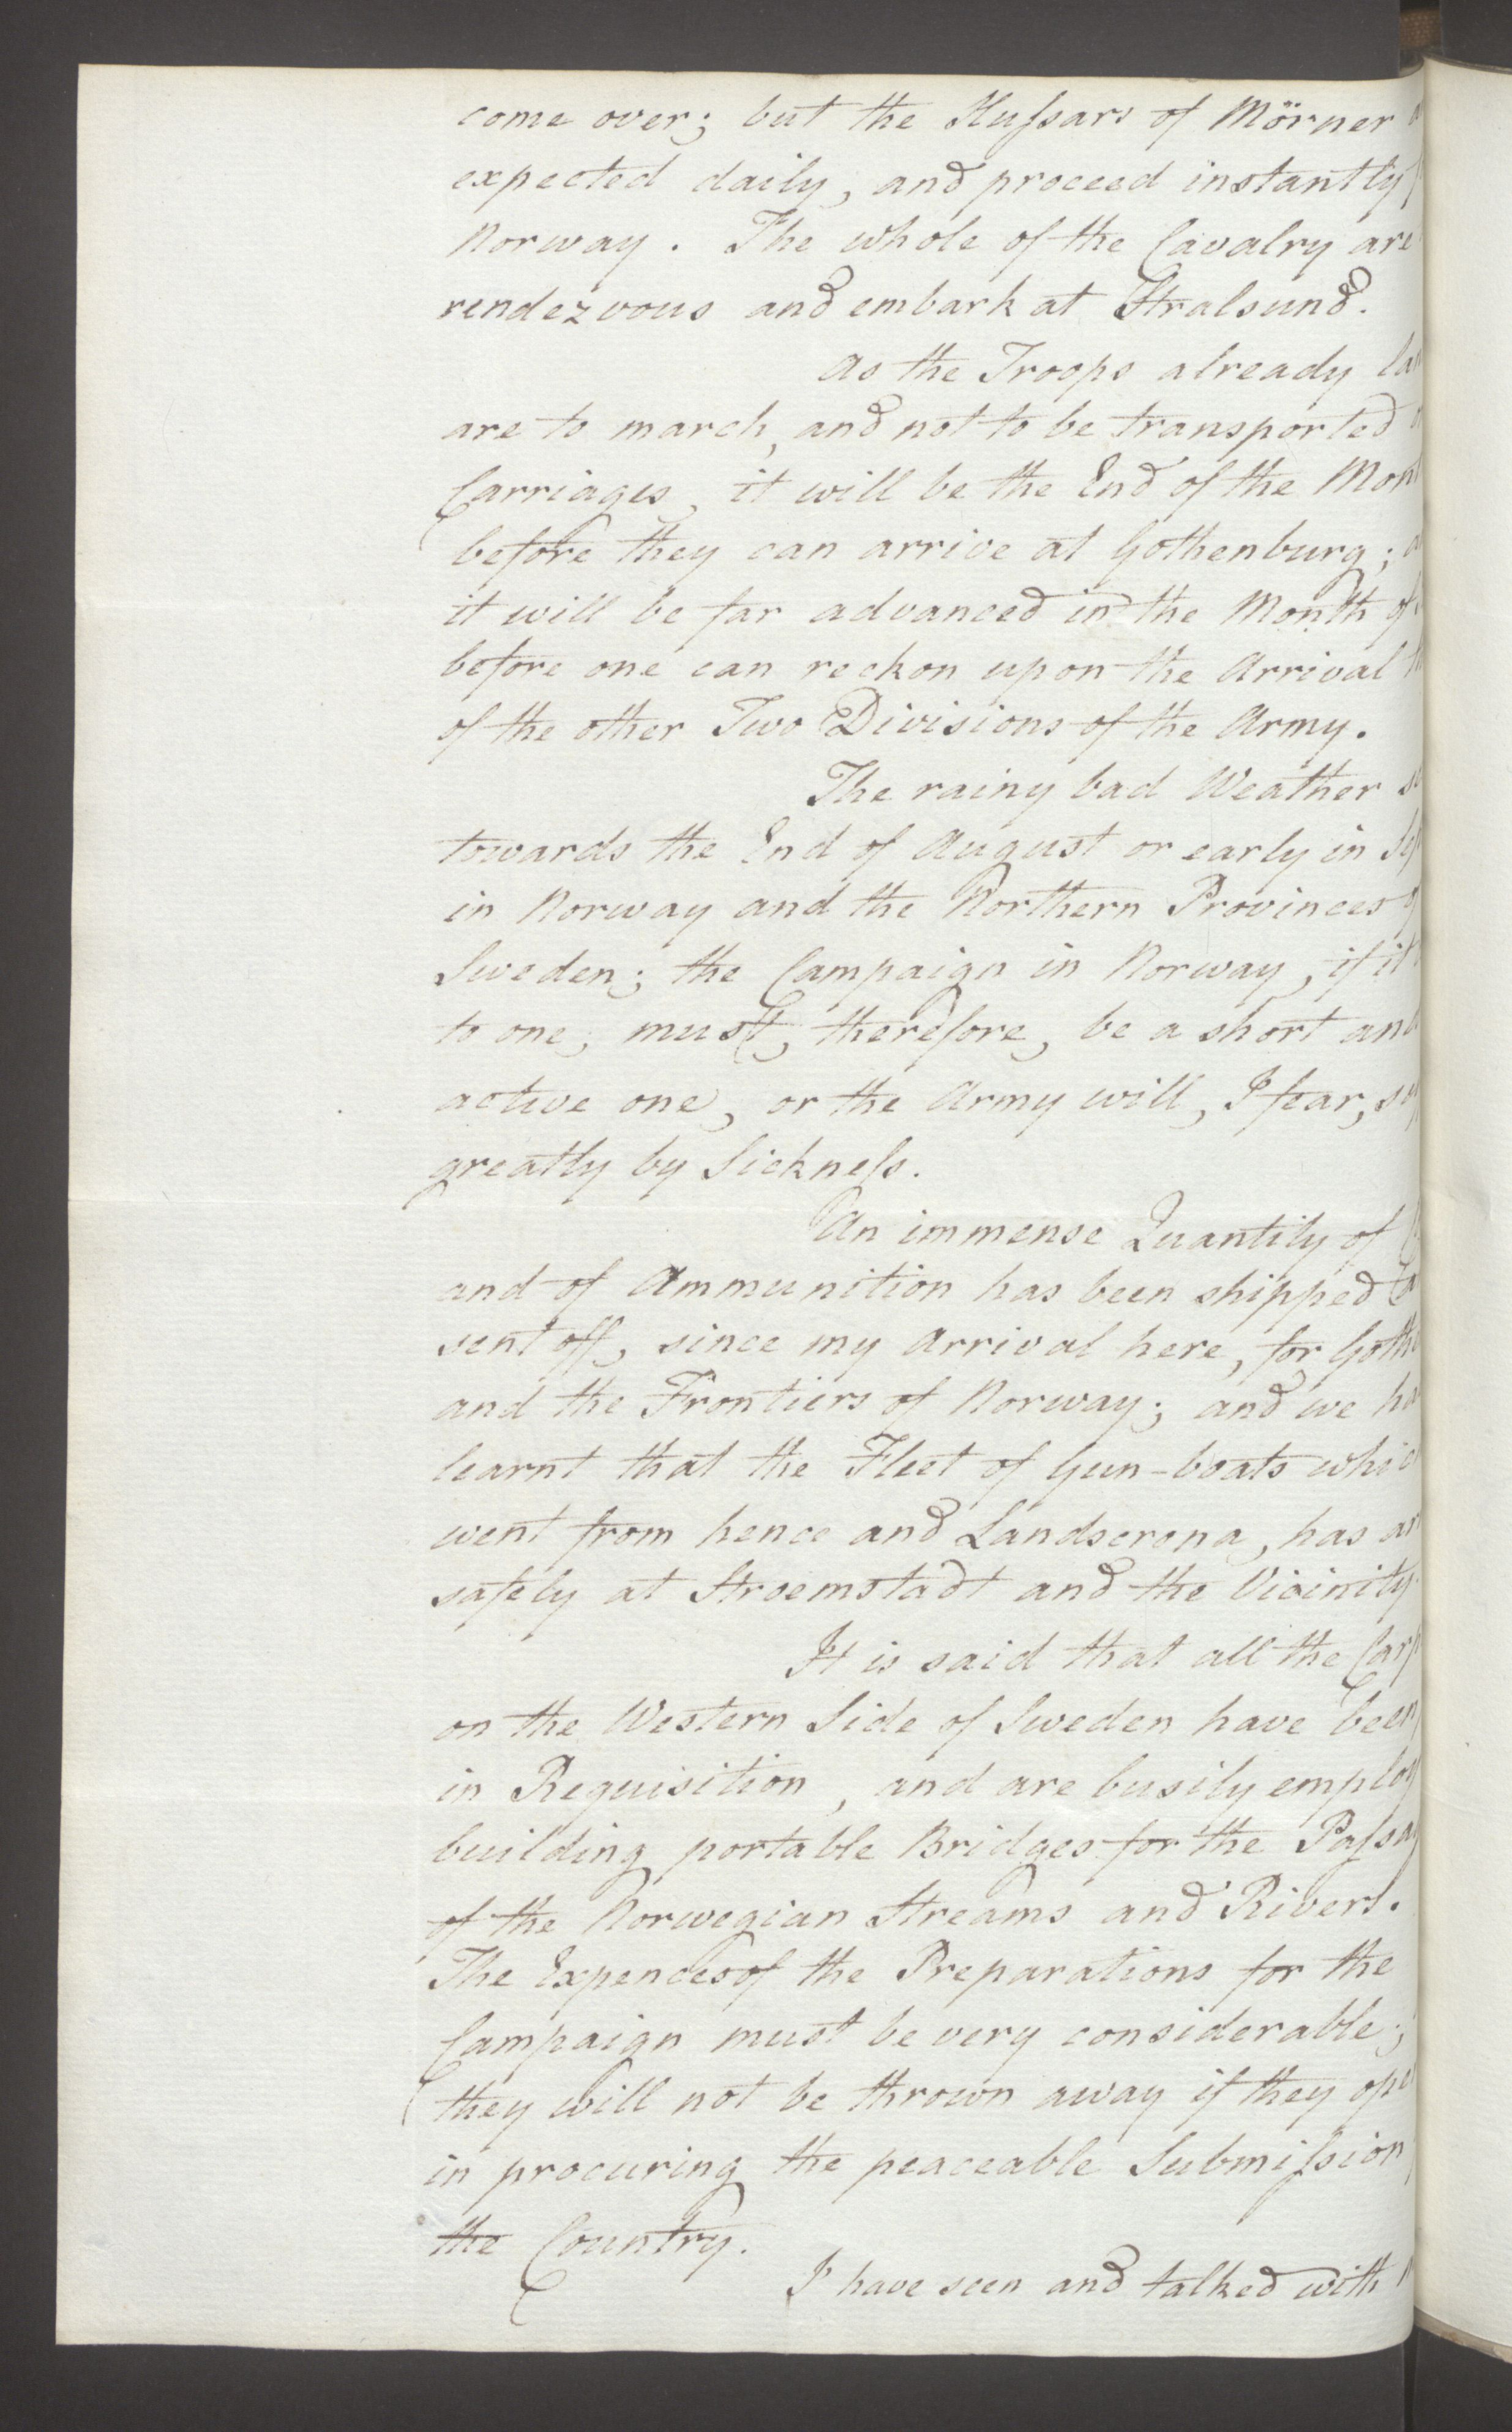 Foreign Office*, UKA/-/FO 38/16: Sir C. Gordon. Reports from Malmö, Jonkoping, and Helsingborg, 1814, s. 64